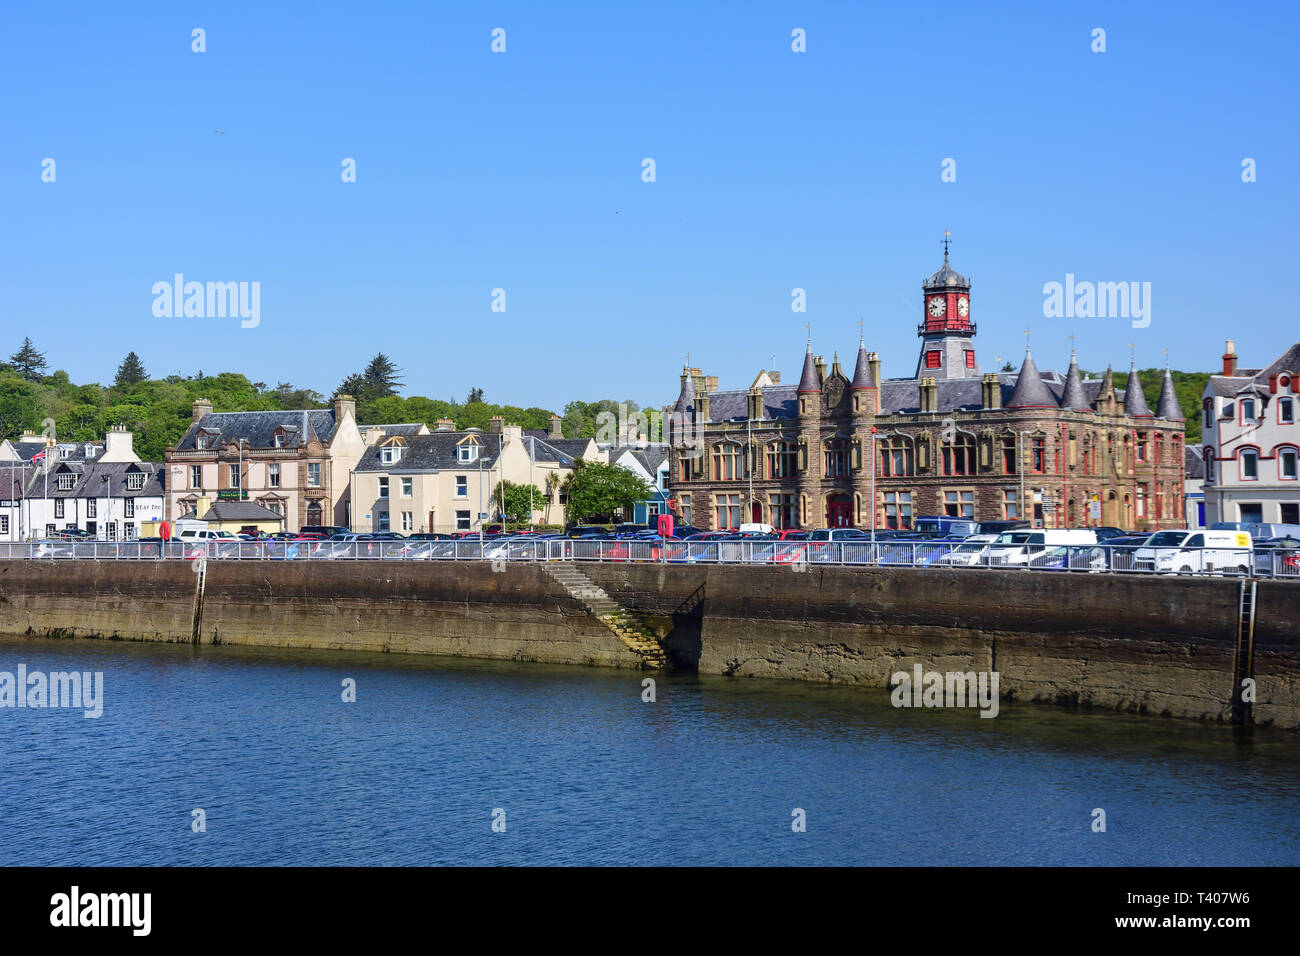 Stornoway seafront showing Town Hall, Stornoway, Isle of Lewis, Outer Hebrides, Na h-Eileanan Siar, Scotland, United Kingdom Stock Photo